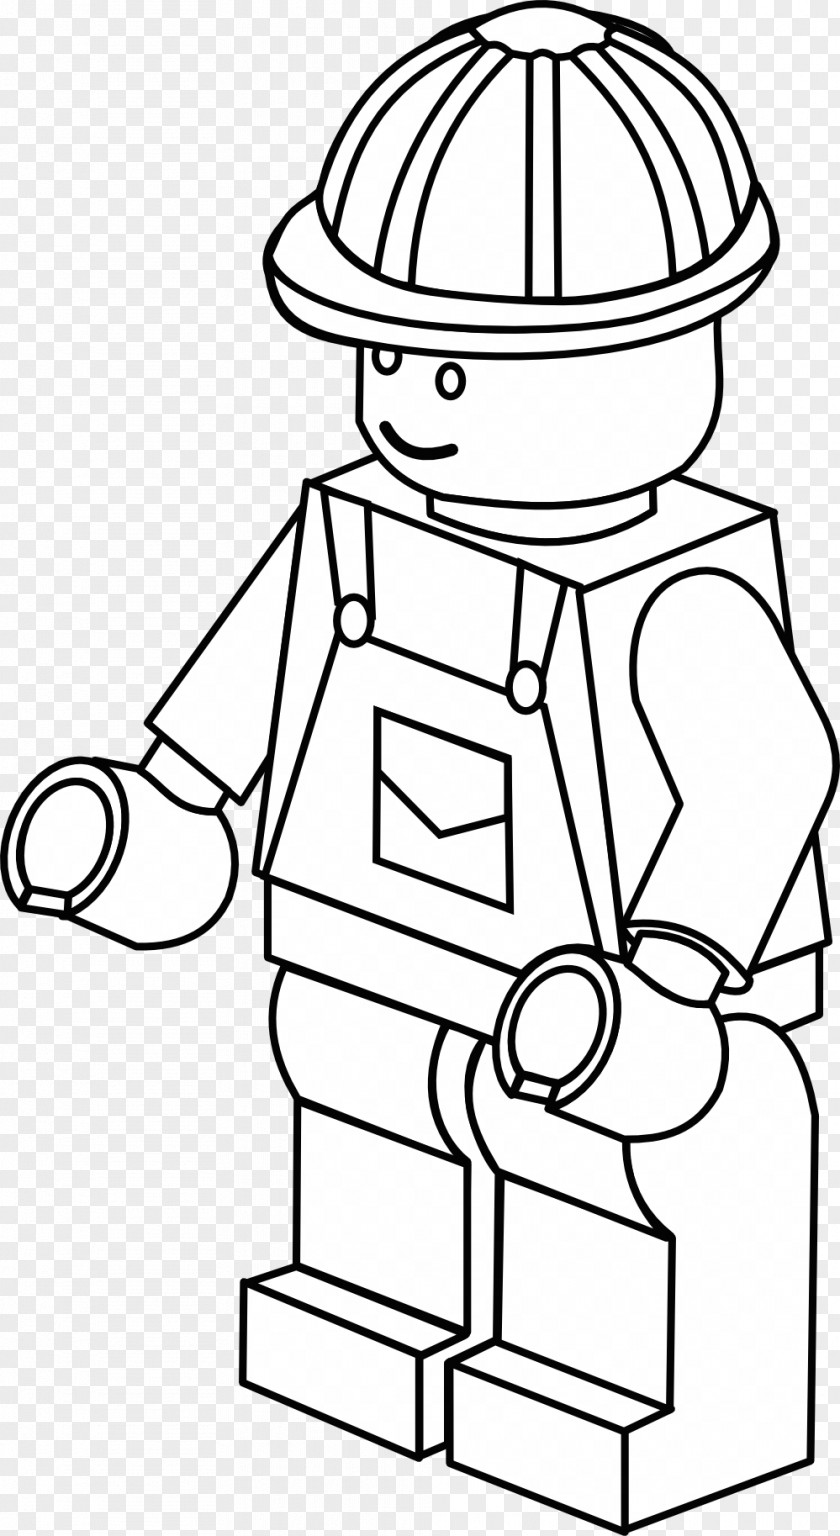 Firefighter Colouring Pages Coloring Book Lego Minifigure PNG